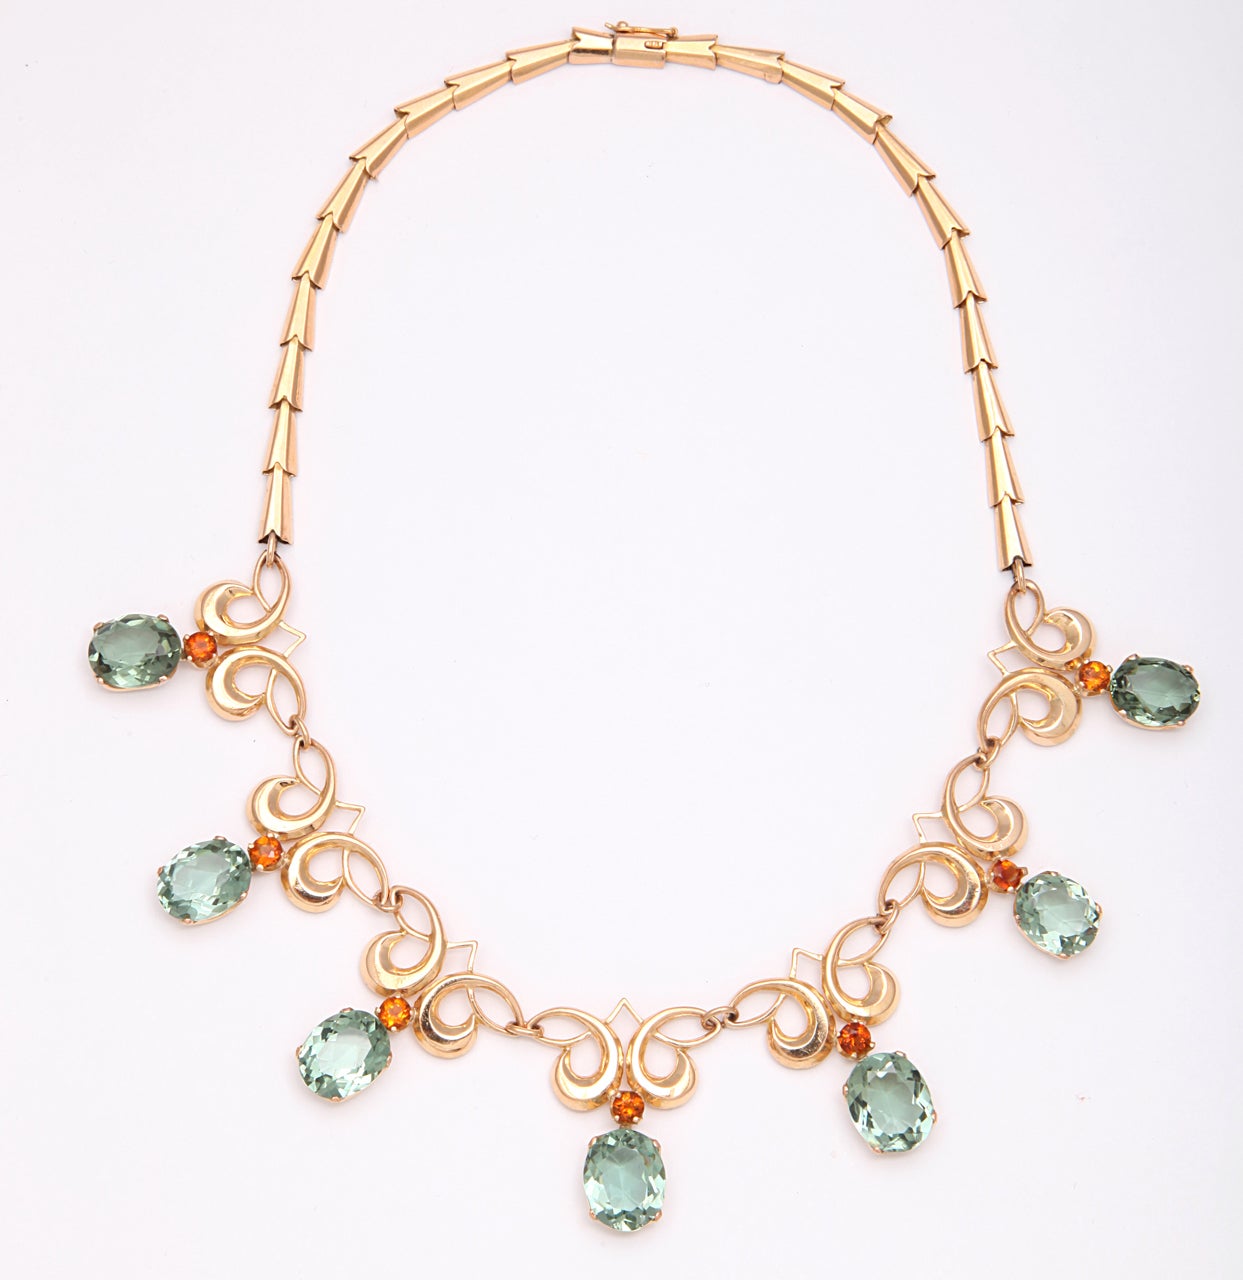 A stunning retro gold handcrafted italian necklace with faceted green amethysts and topazes collet set links A work of Art